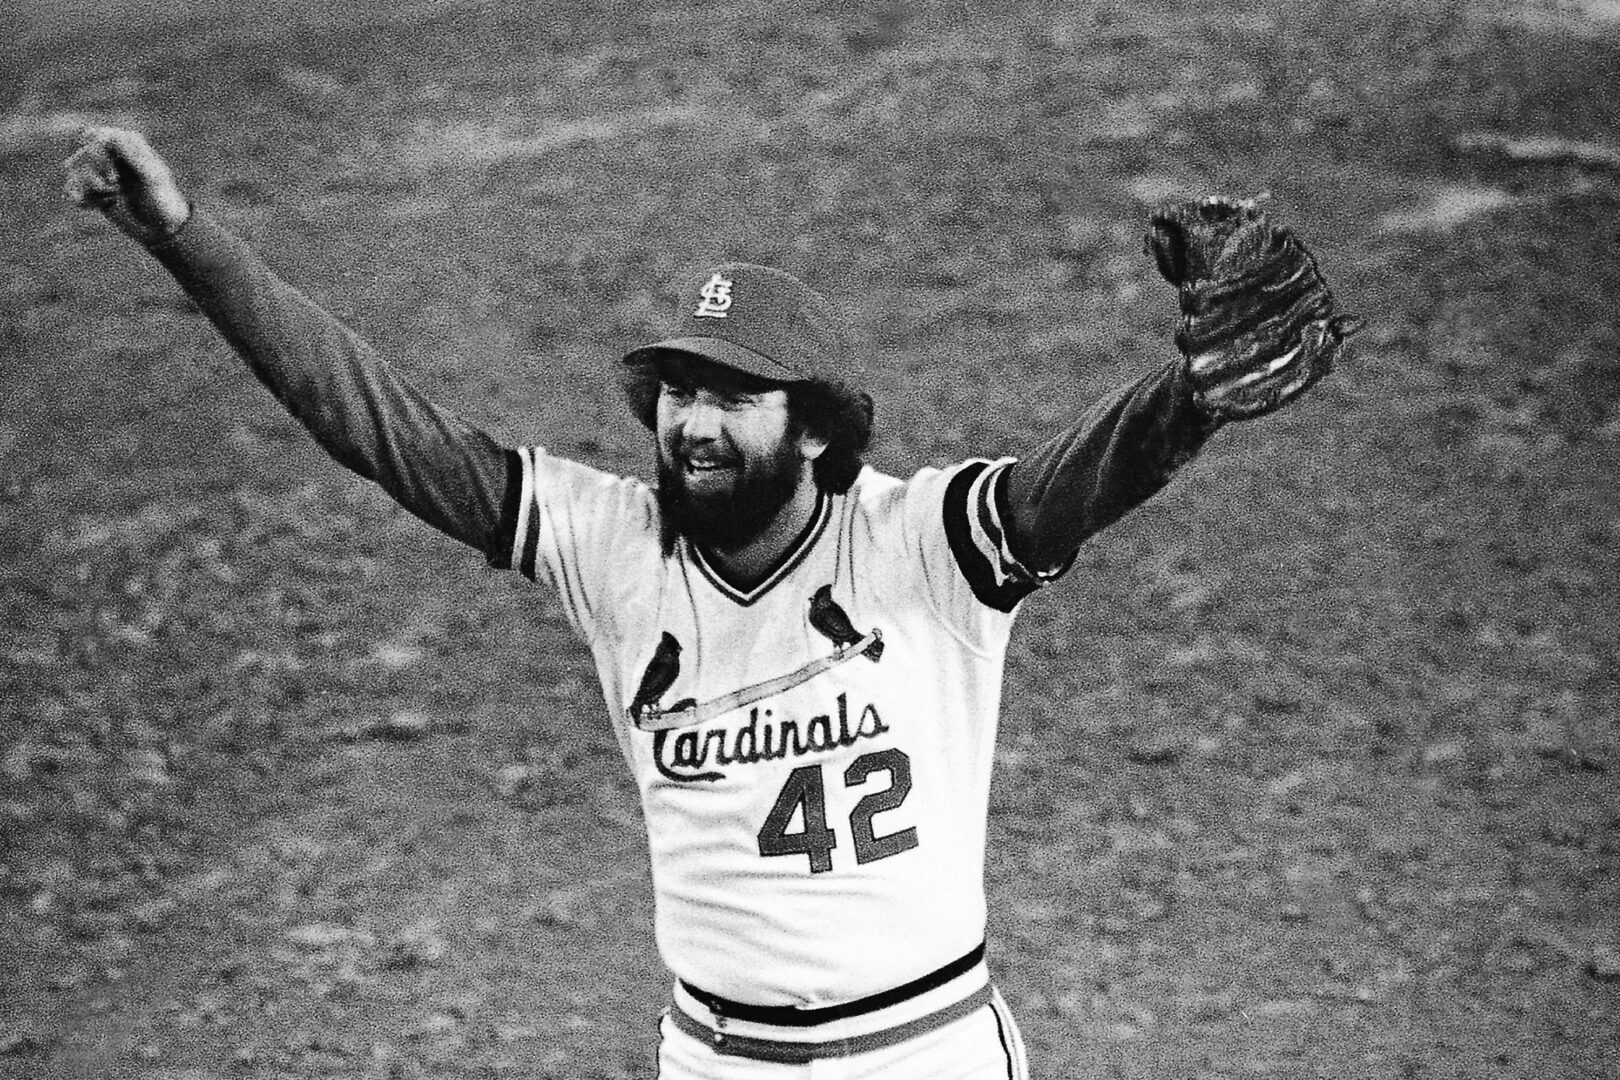 Lancaster County native Bruce Sutter, Hall of Famer and Cy Young winner, dies at 69 WITF